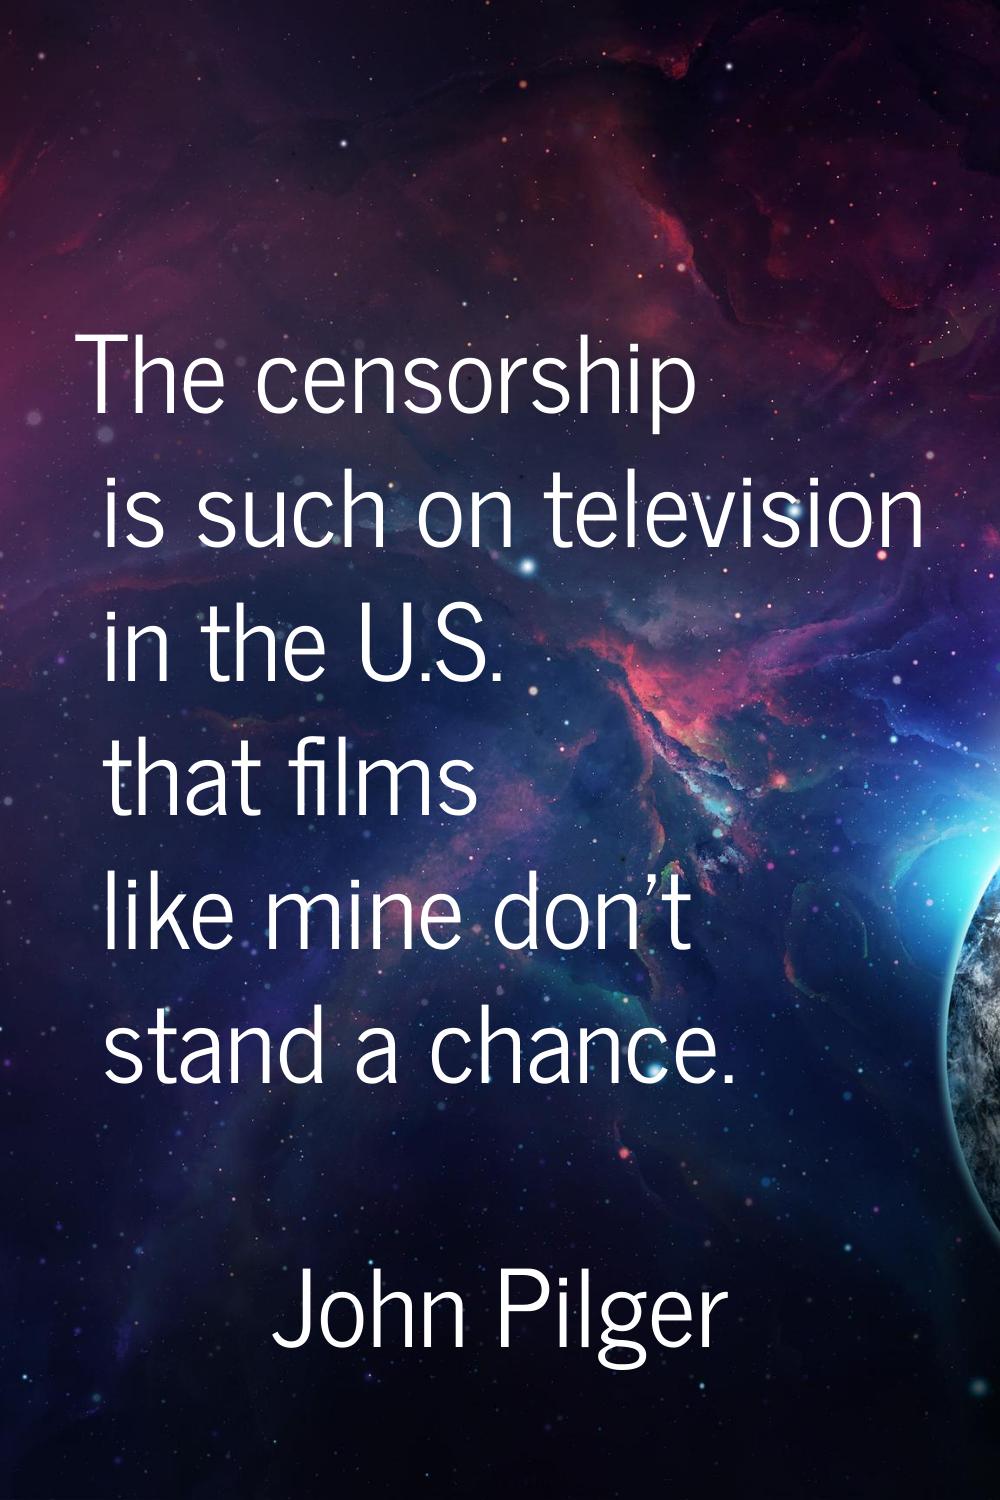 The censorship is such on television in the U.S. that films like mine don't stand a chance.